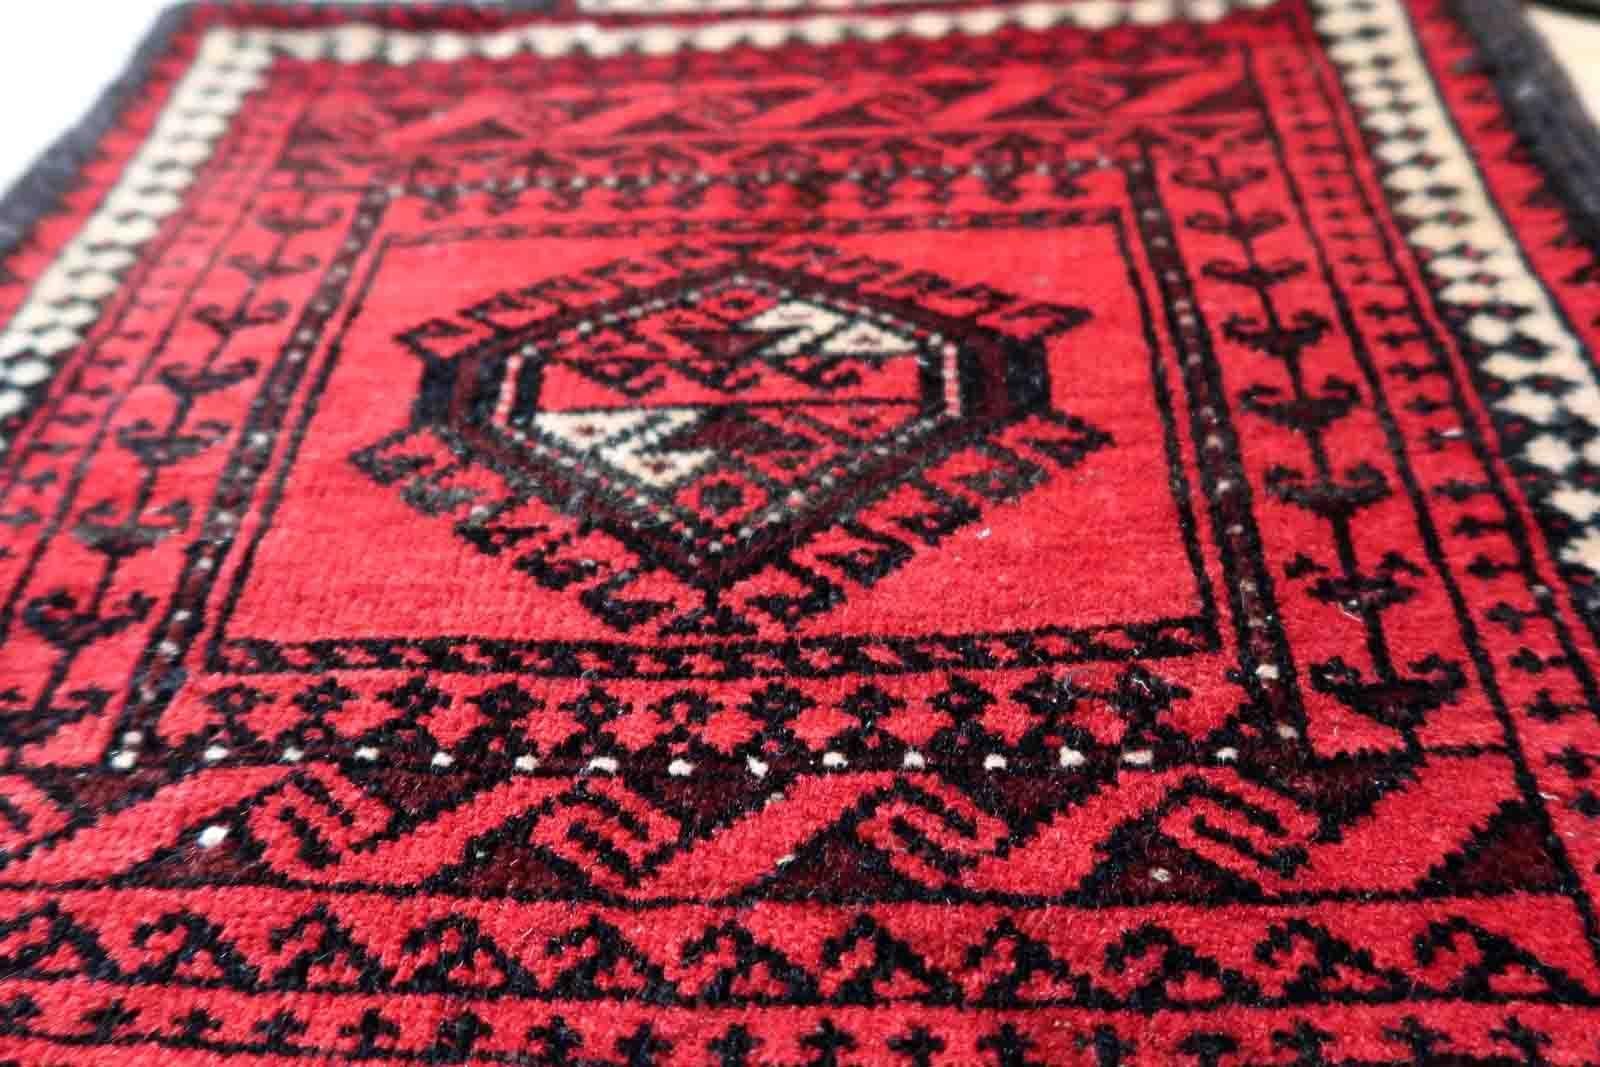 Handmade vintage Afghan Baluch salt bag in bright red color. The bag is from the end of 20th century in original good condition.

-condition: original good,

-circa: 1970s,

-size: 1.3' x 1.6' (41cm x 49cm),

-material: wool,

-country of